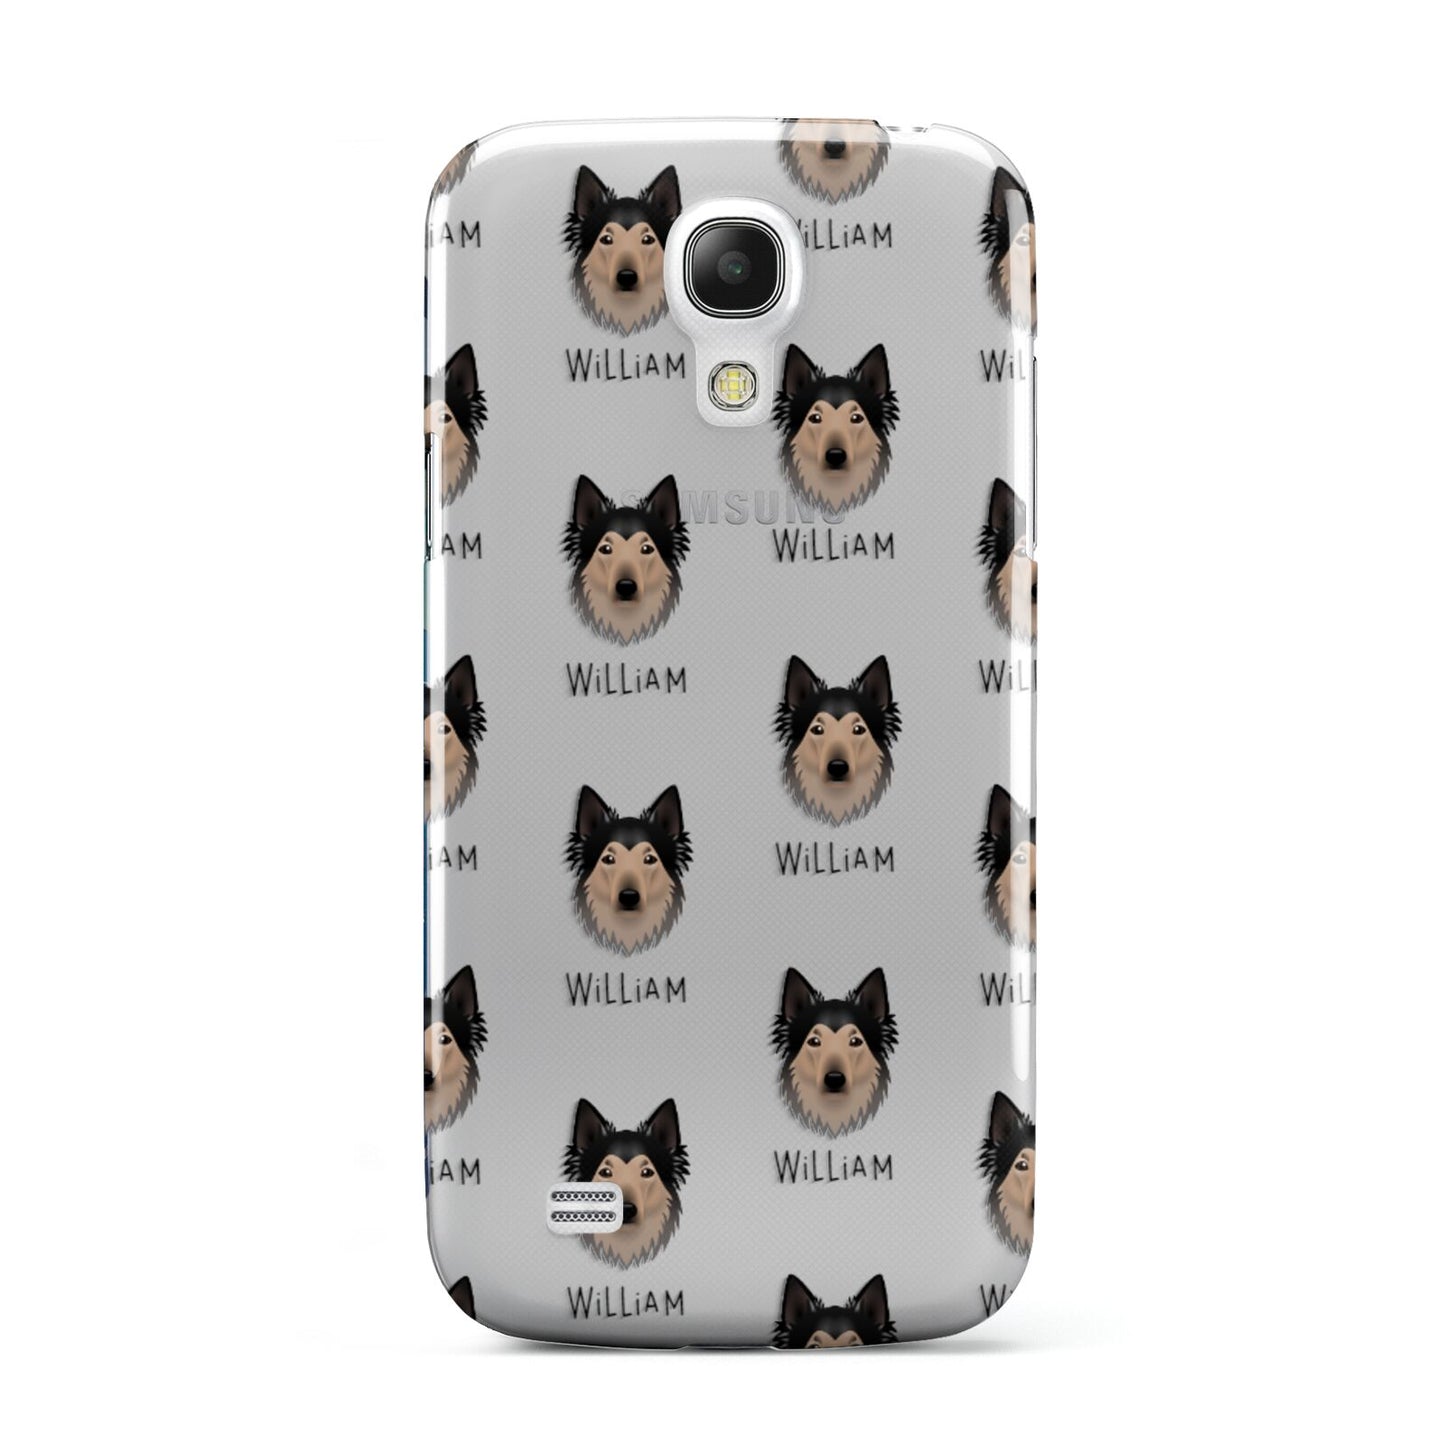 Shollie Icon with Name Samsung Galaxy S4 Mini Case